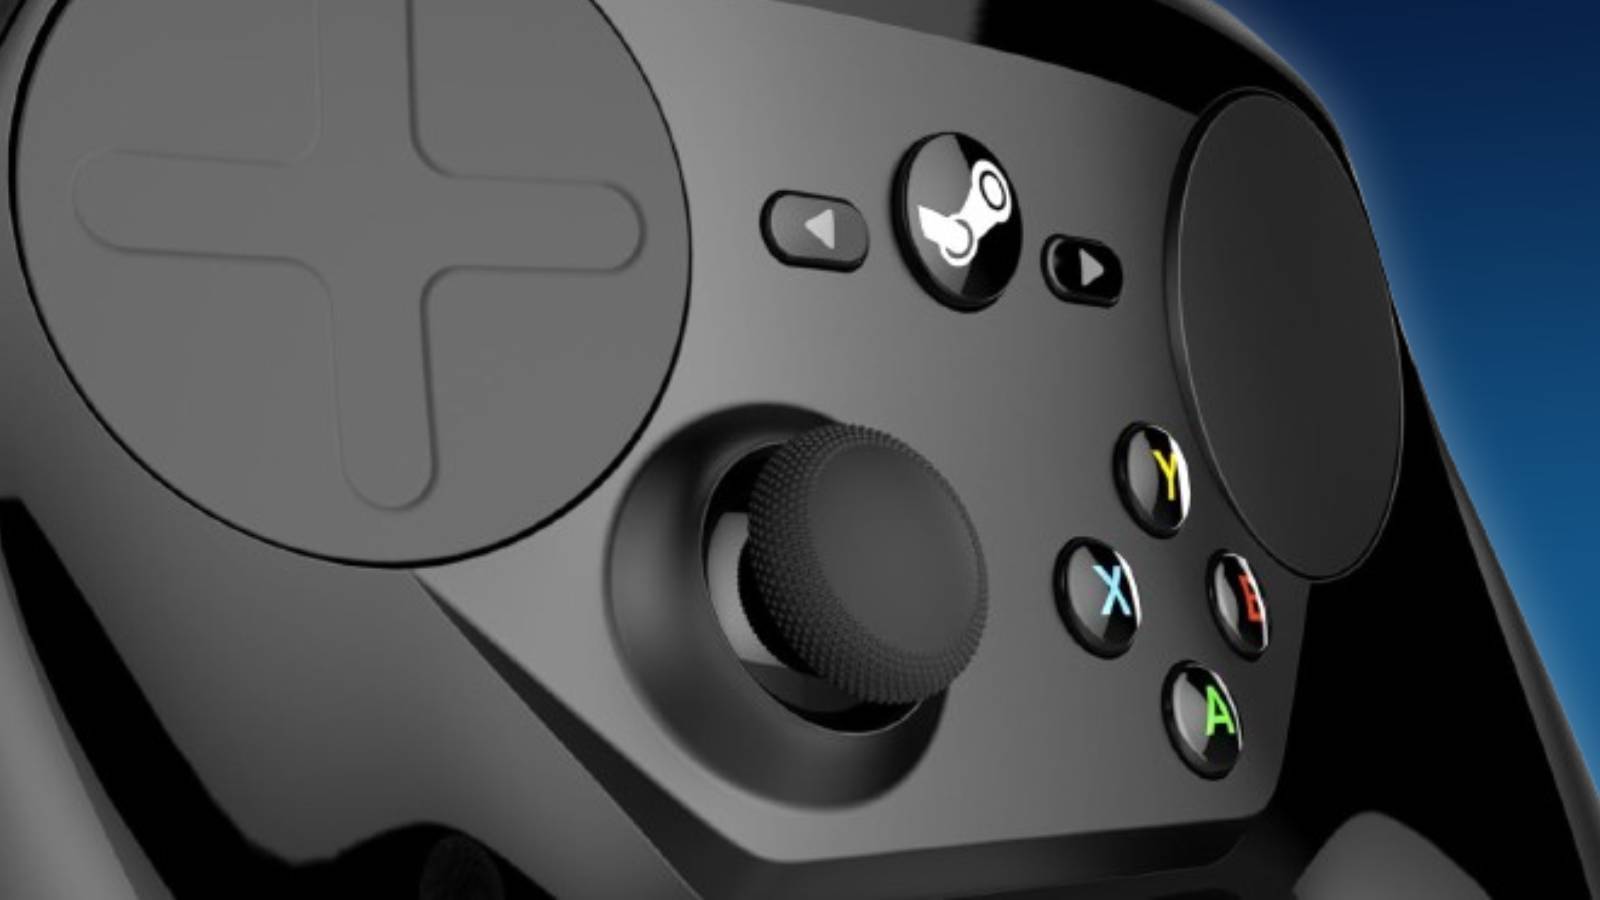 Image of the Steam Controller, with a blue gradient background.